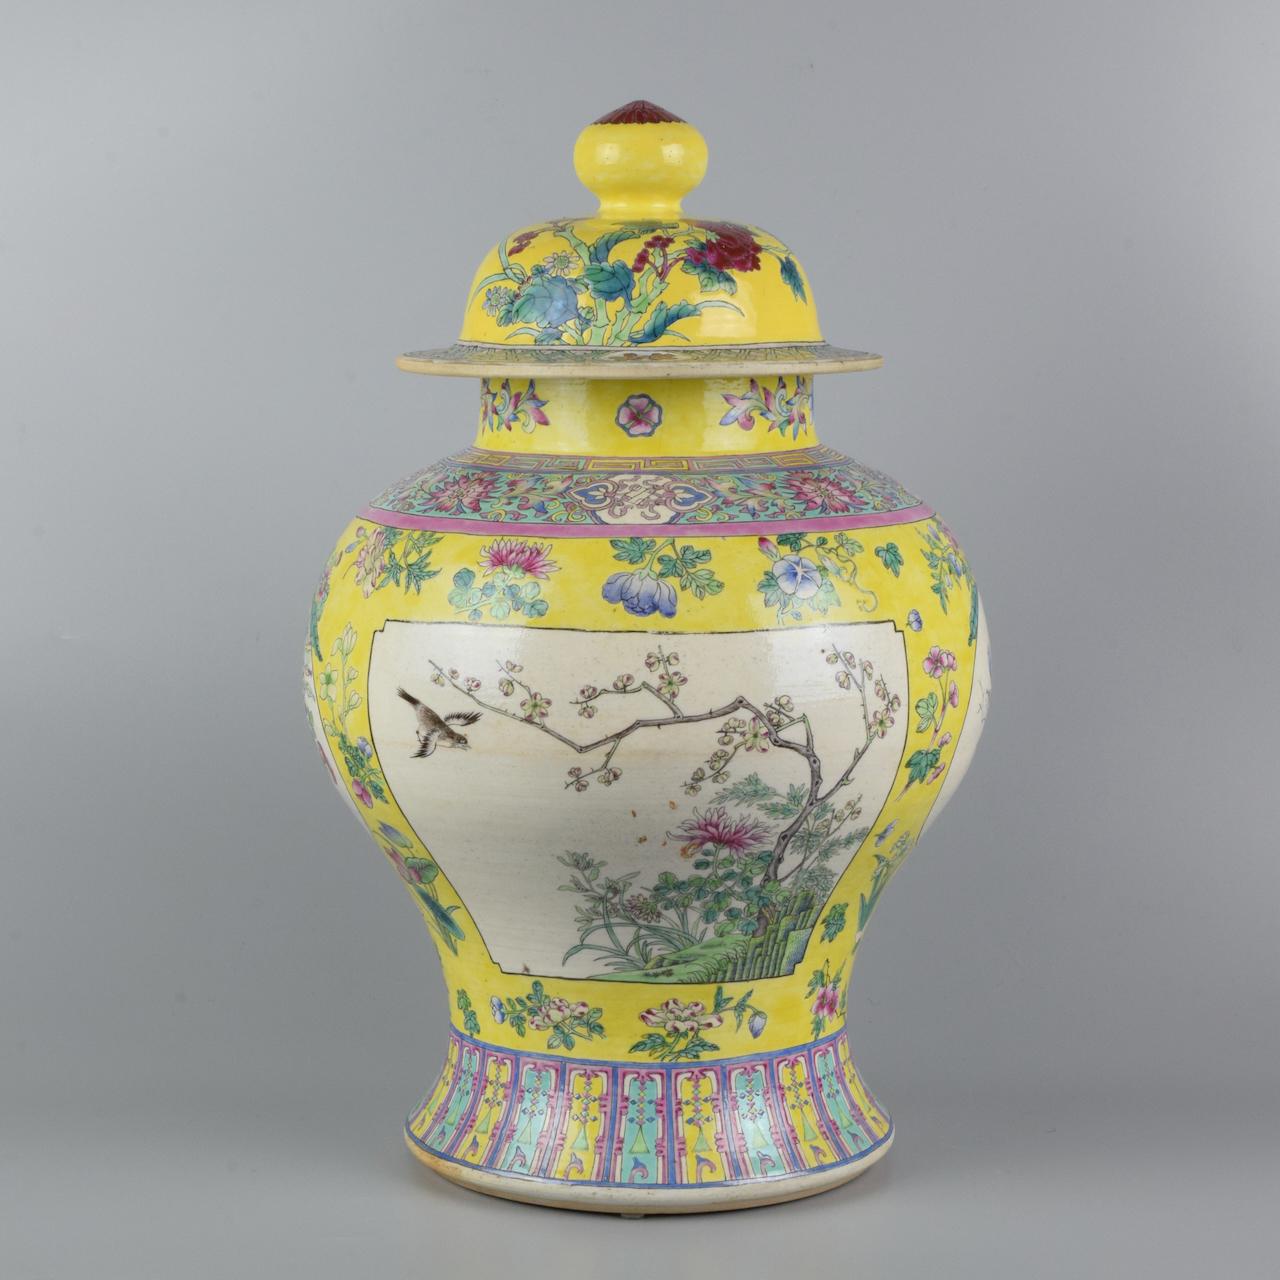 China, Sec. XX
Decorations on yellow background containing flowers and birds on flowering branches.
Mild spinning on the neck.
Height about 38 cm.